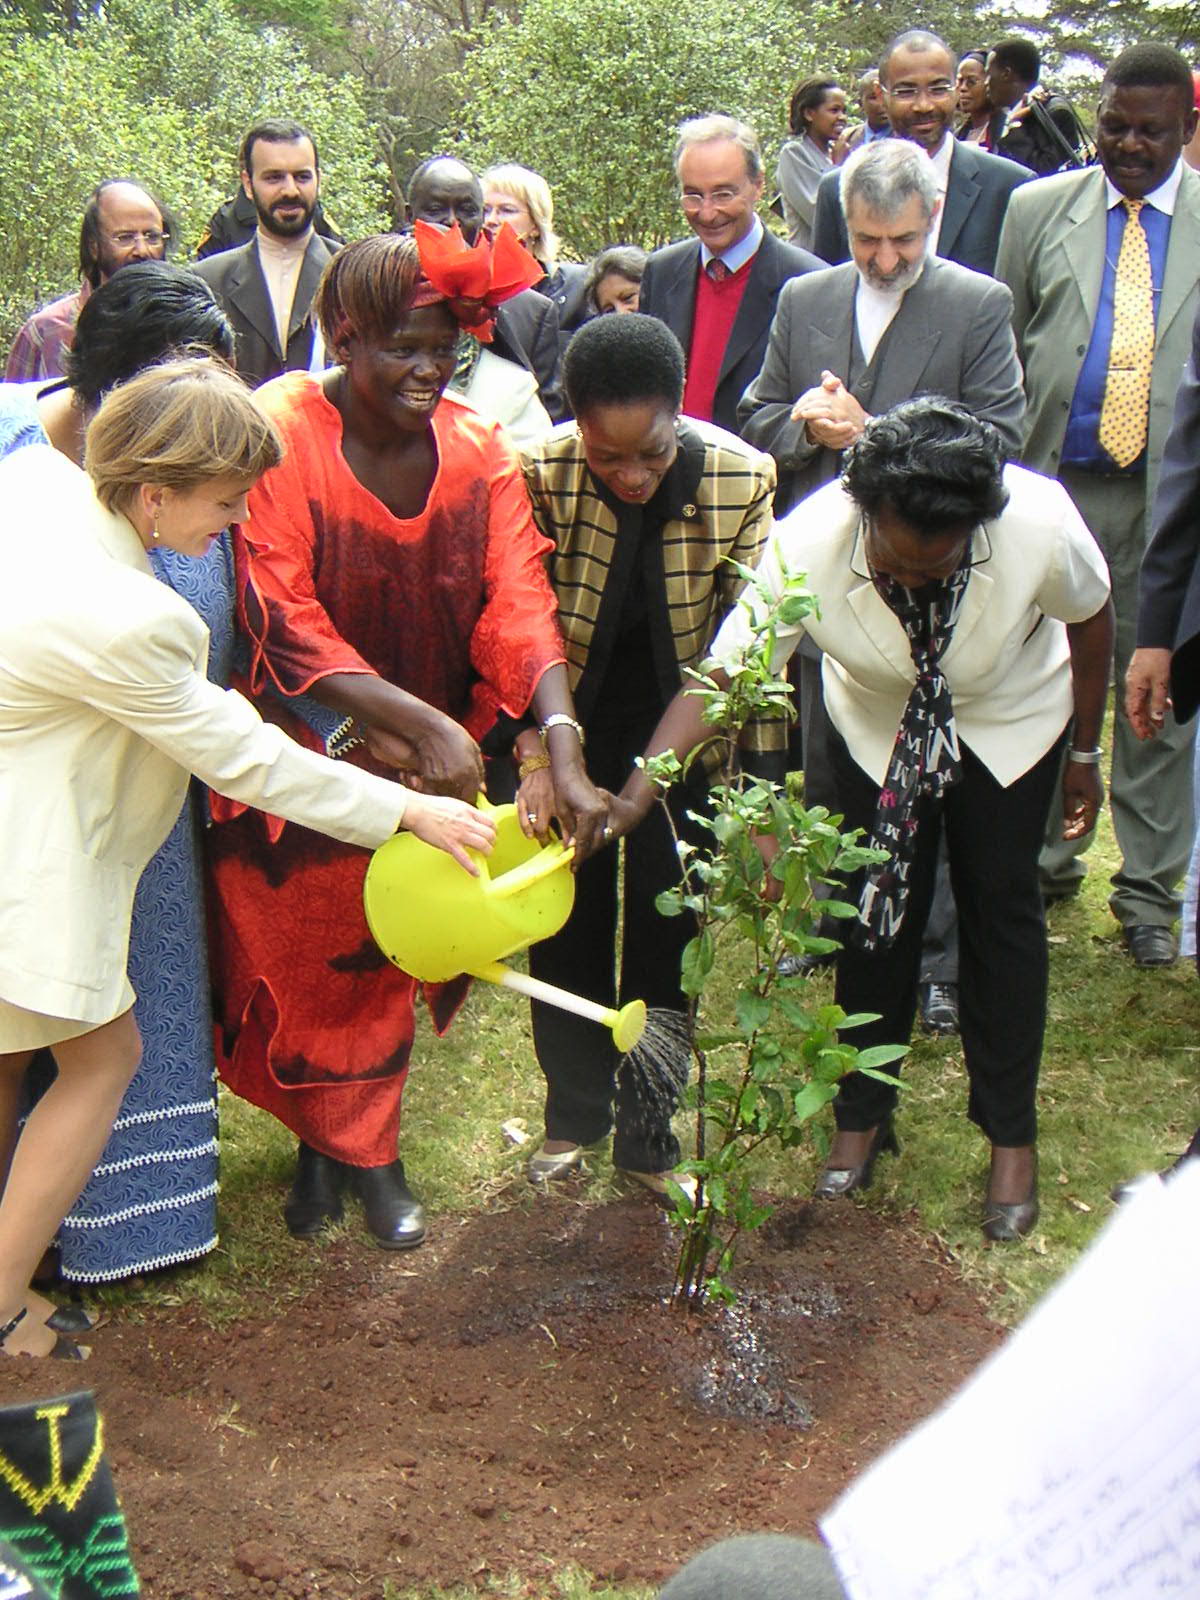 Wangari and others planting a tree